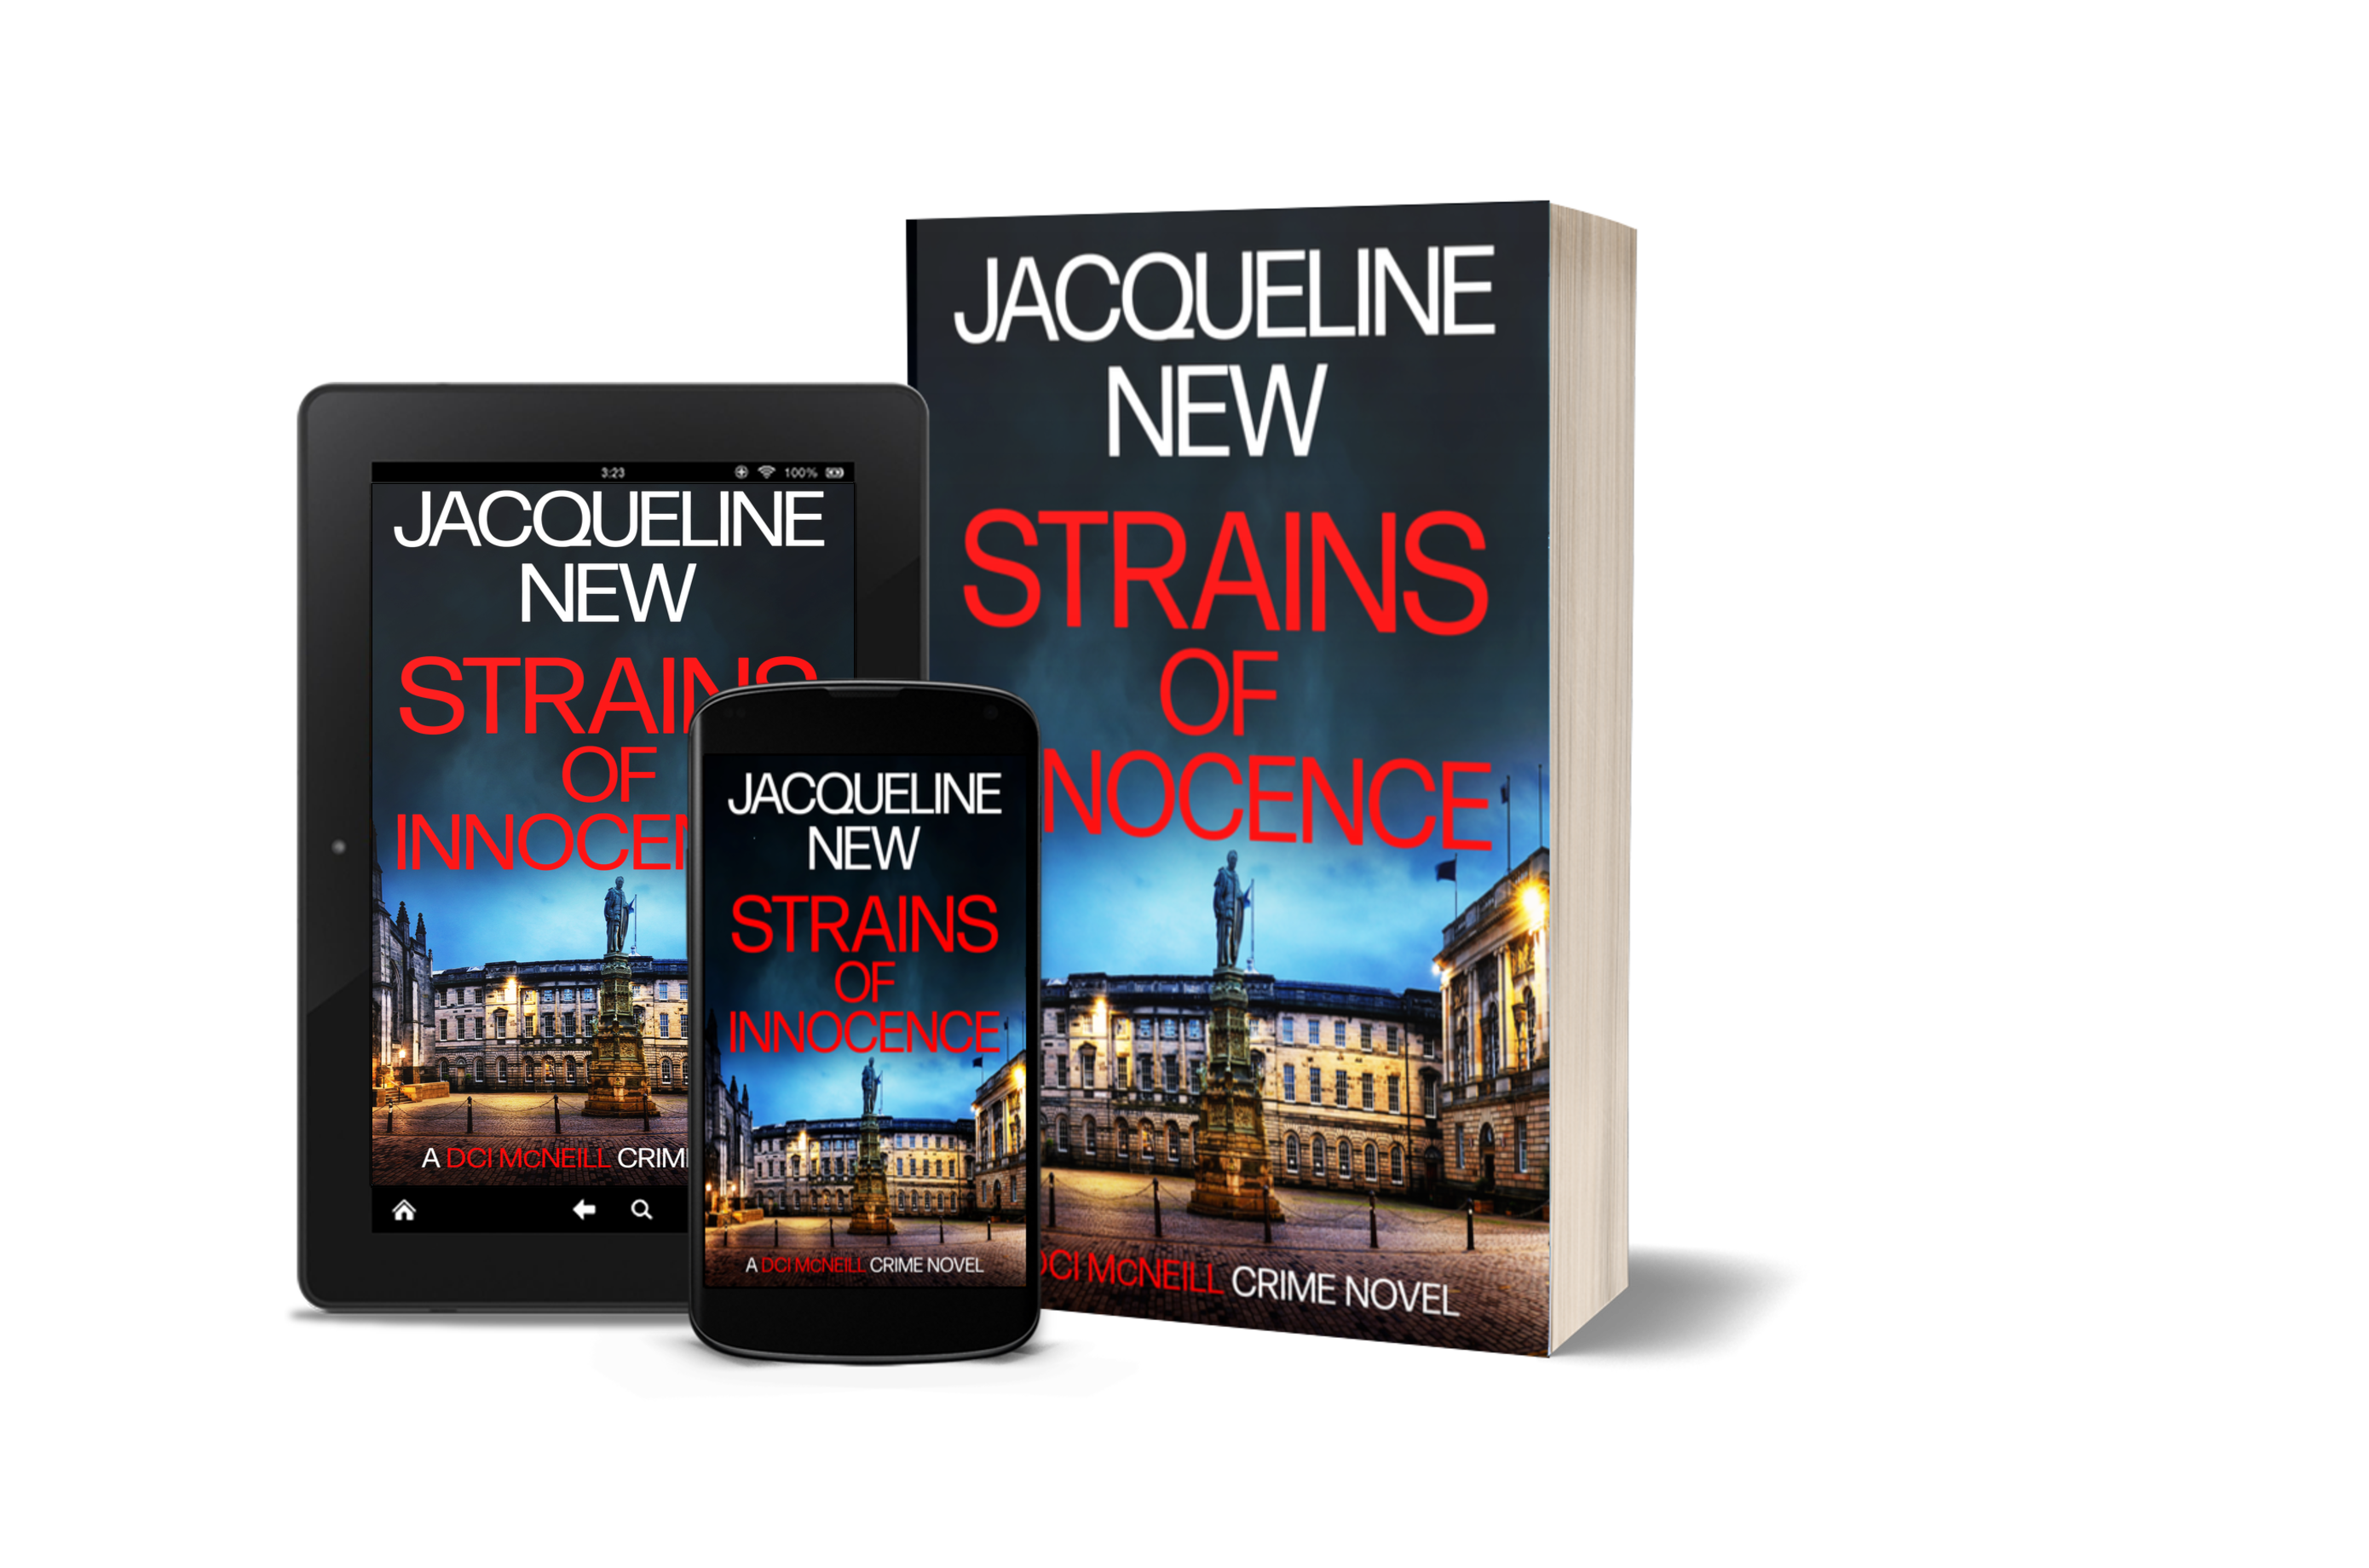 Strains of Innocence book two in the bestselling Scottish police procedural thriller by Jacqueline New